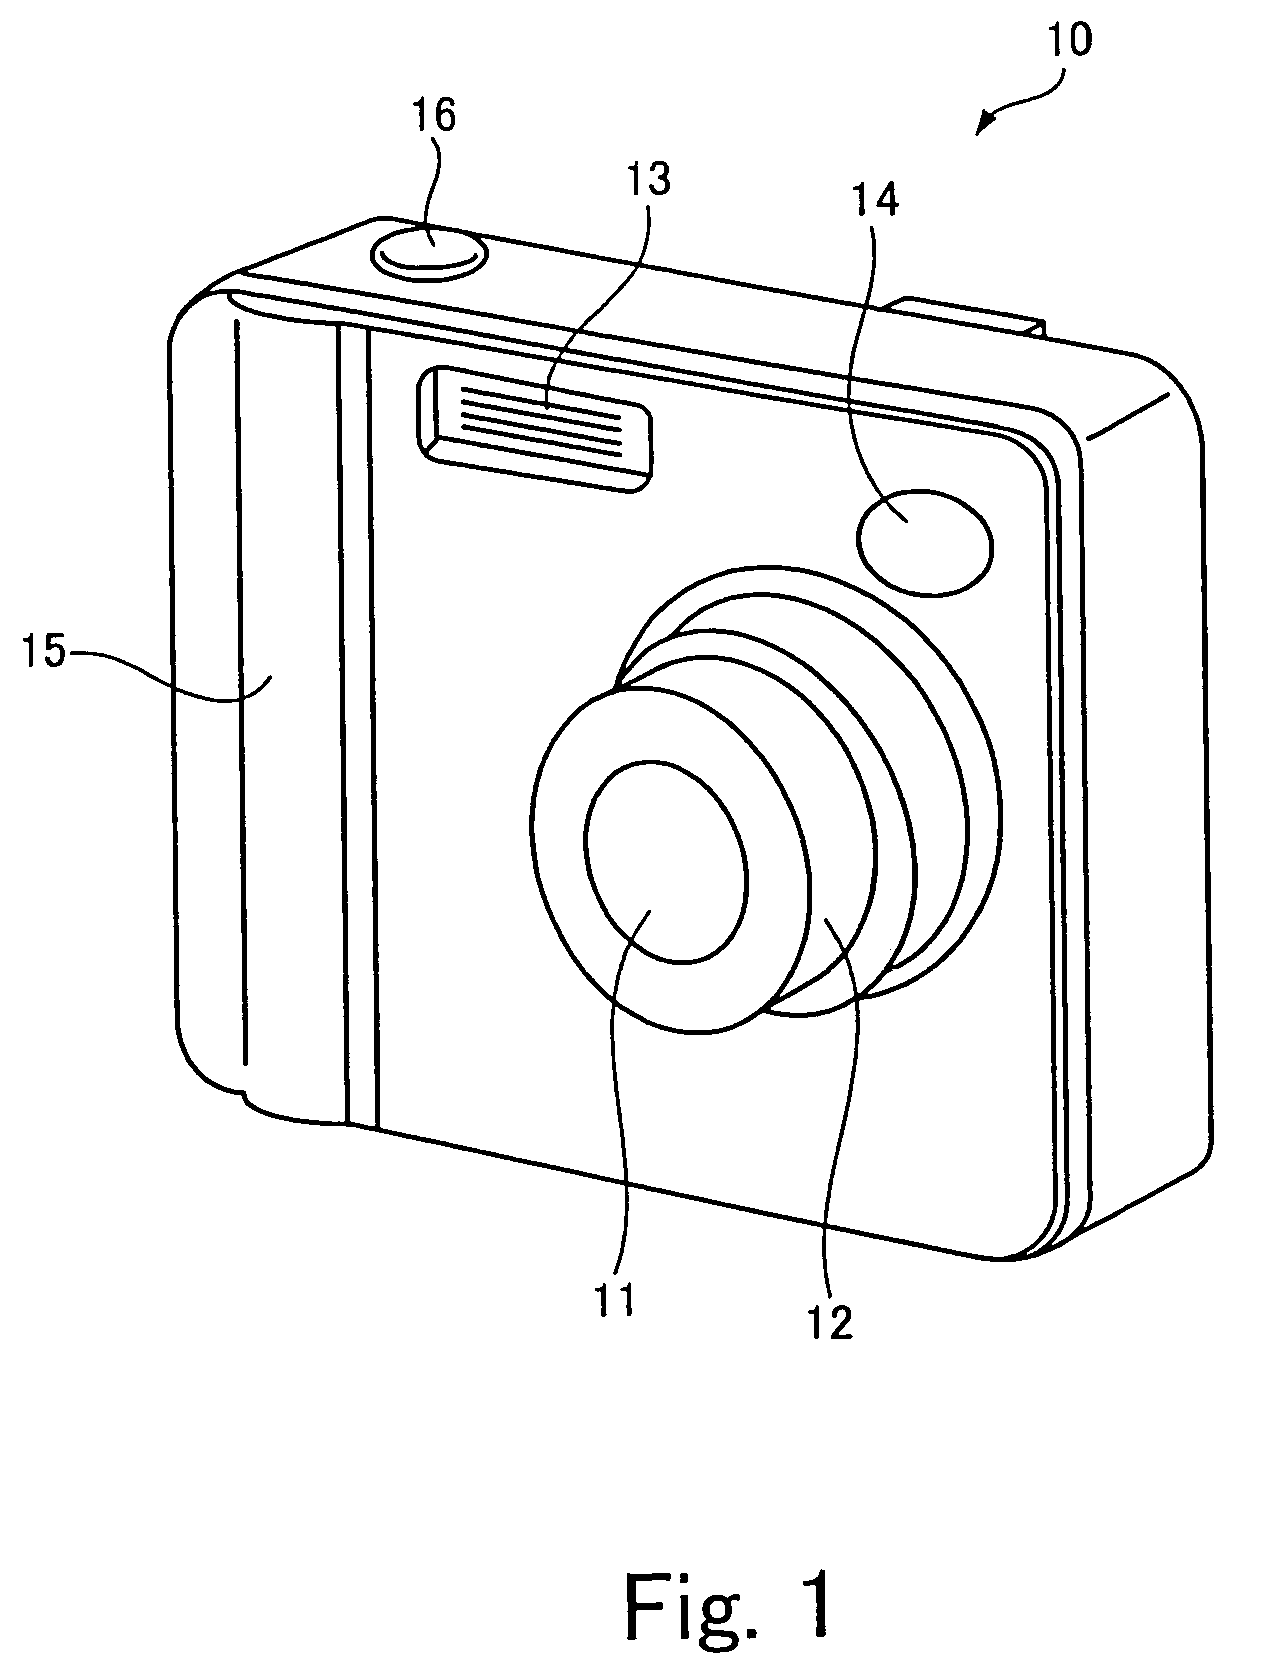 Image-taking apparatus that shoots a still image when a release button is pressed